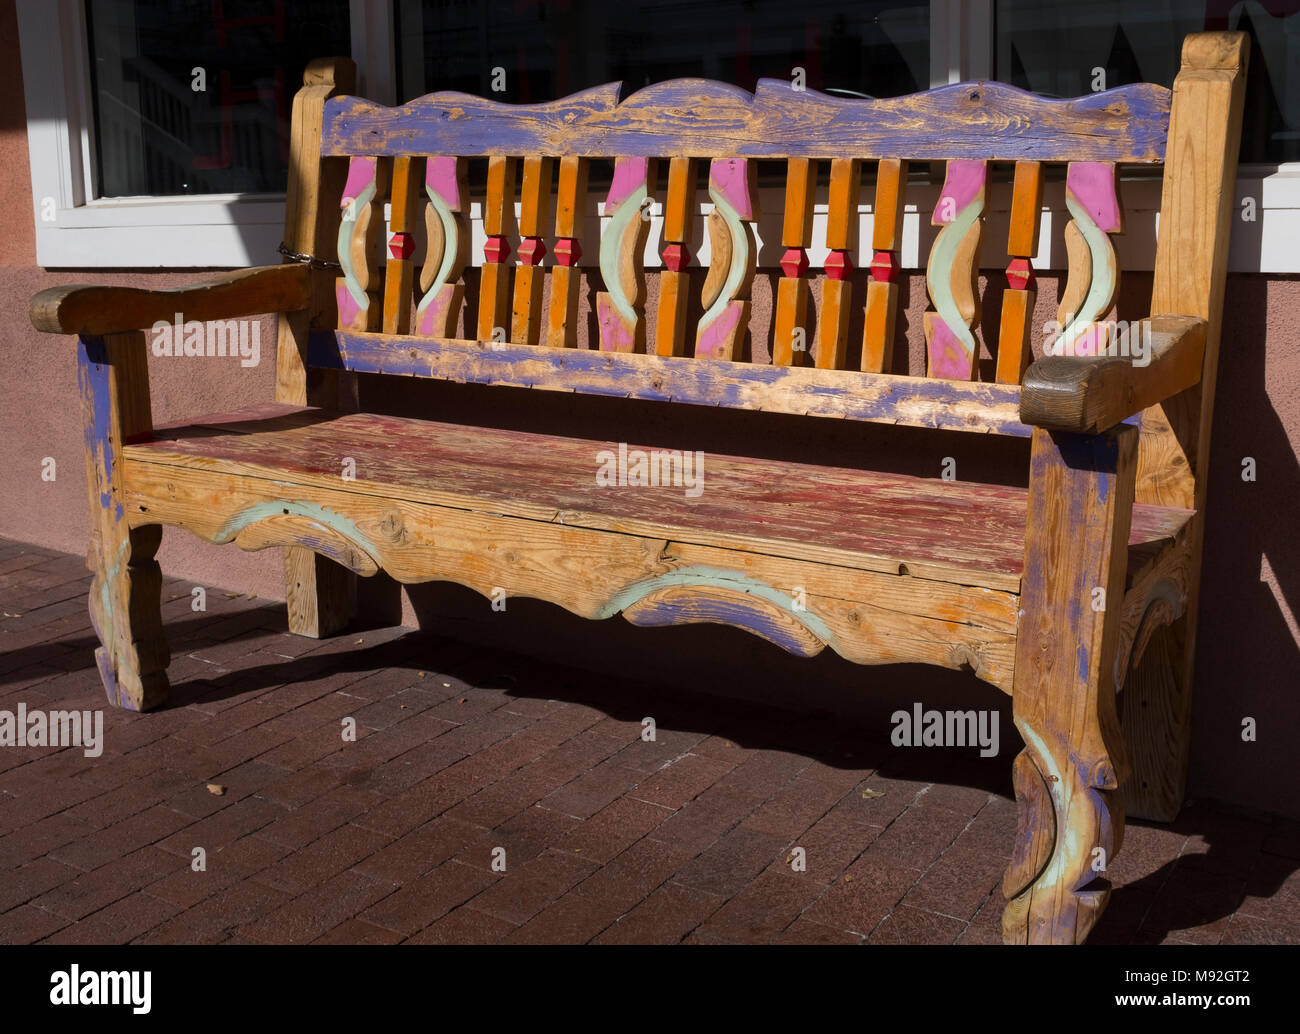 Decorative Outdoor Wooden Bench Stock Photo Alamy